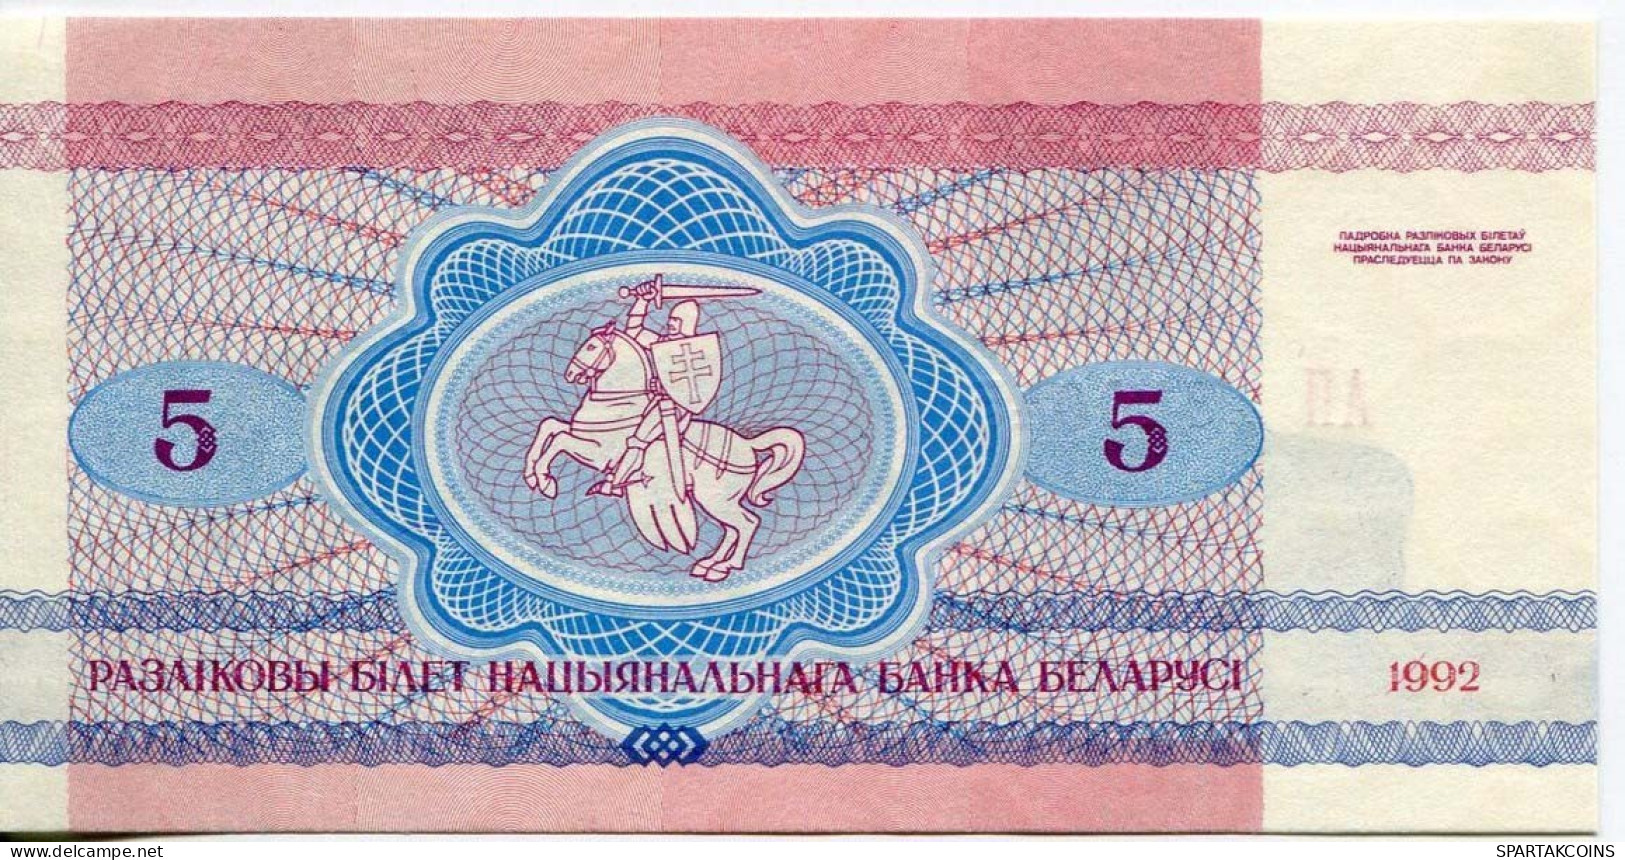 BELARUS 5 RUBLES 1992 Wolves Paper Money Banknote #P10192 - [11] Local Banknote Issues